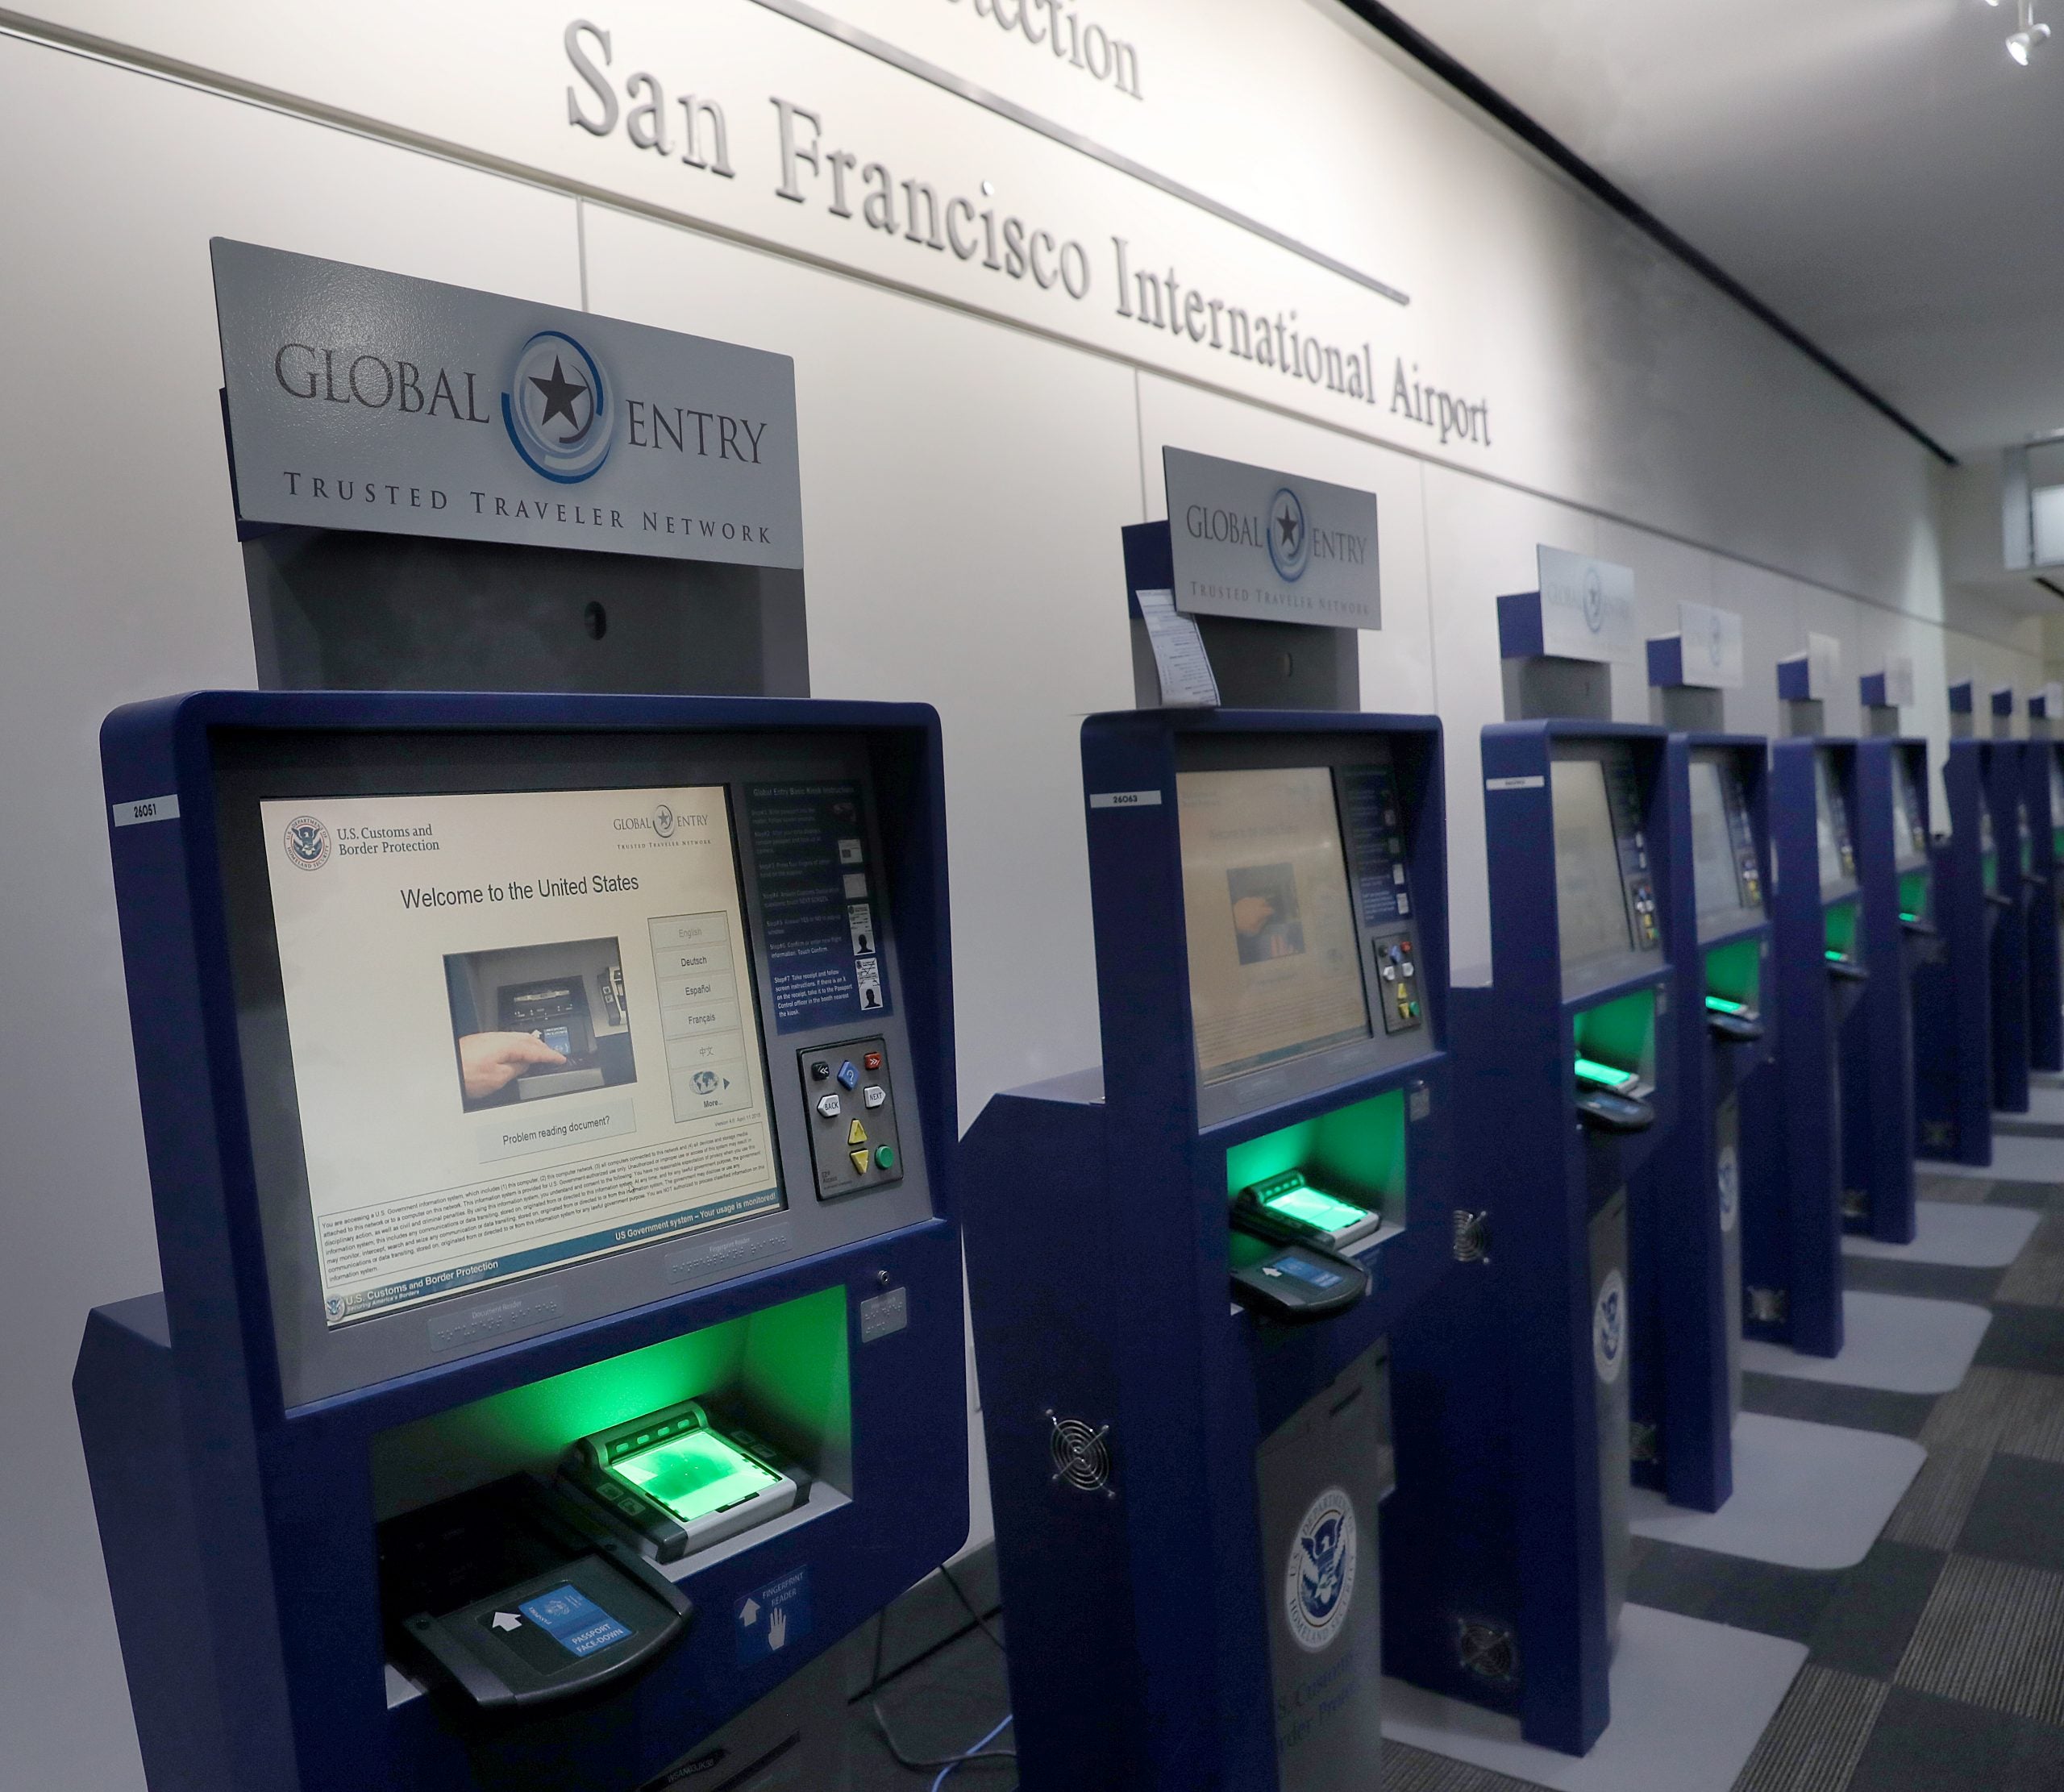 View of the Global Entry computers at the U.S. Customs and Border Protection in the San Francisco International airport on Thursday, July 26, 2018 in San Francisco, Calif.